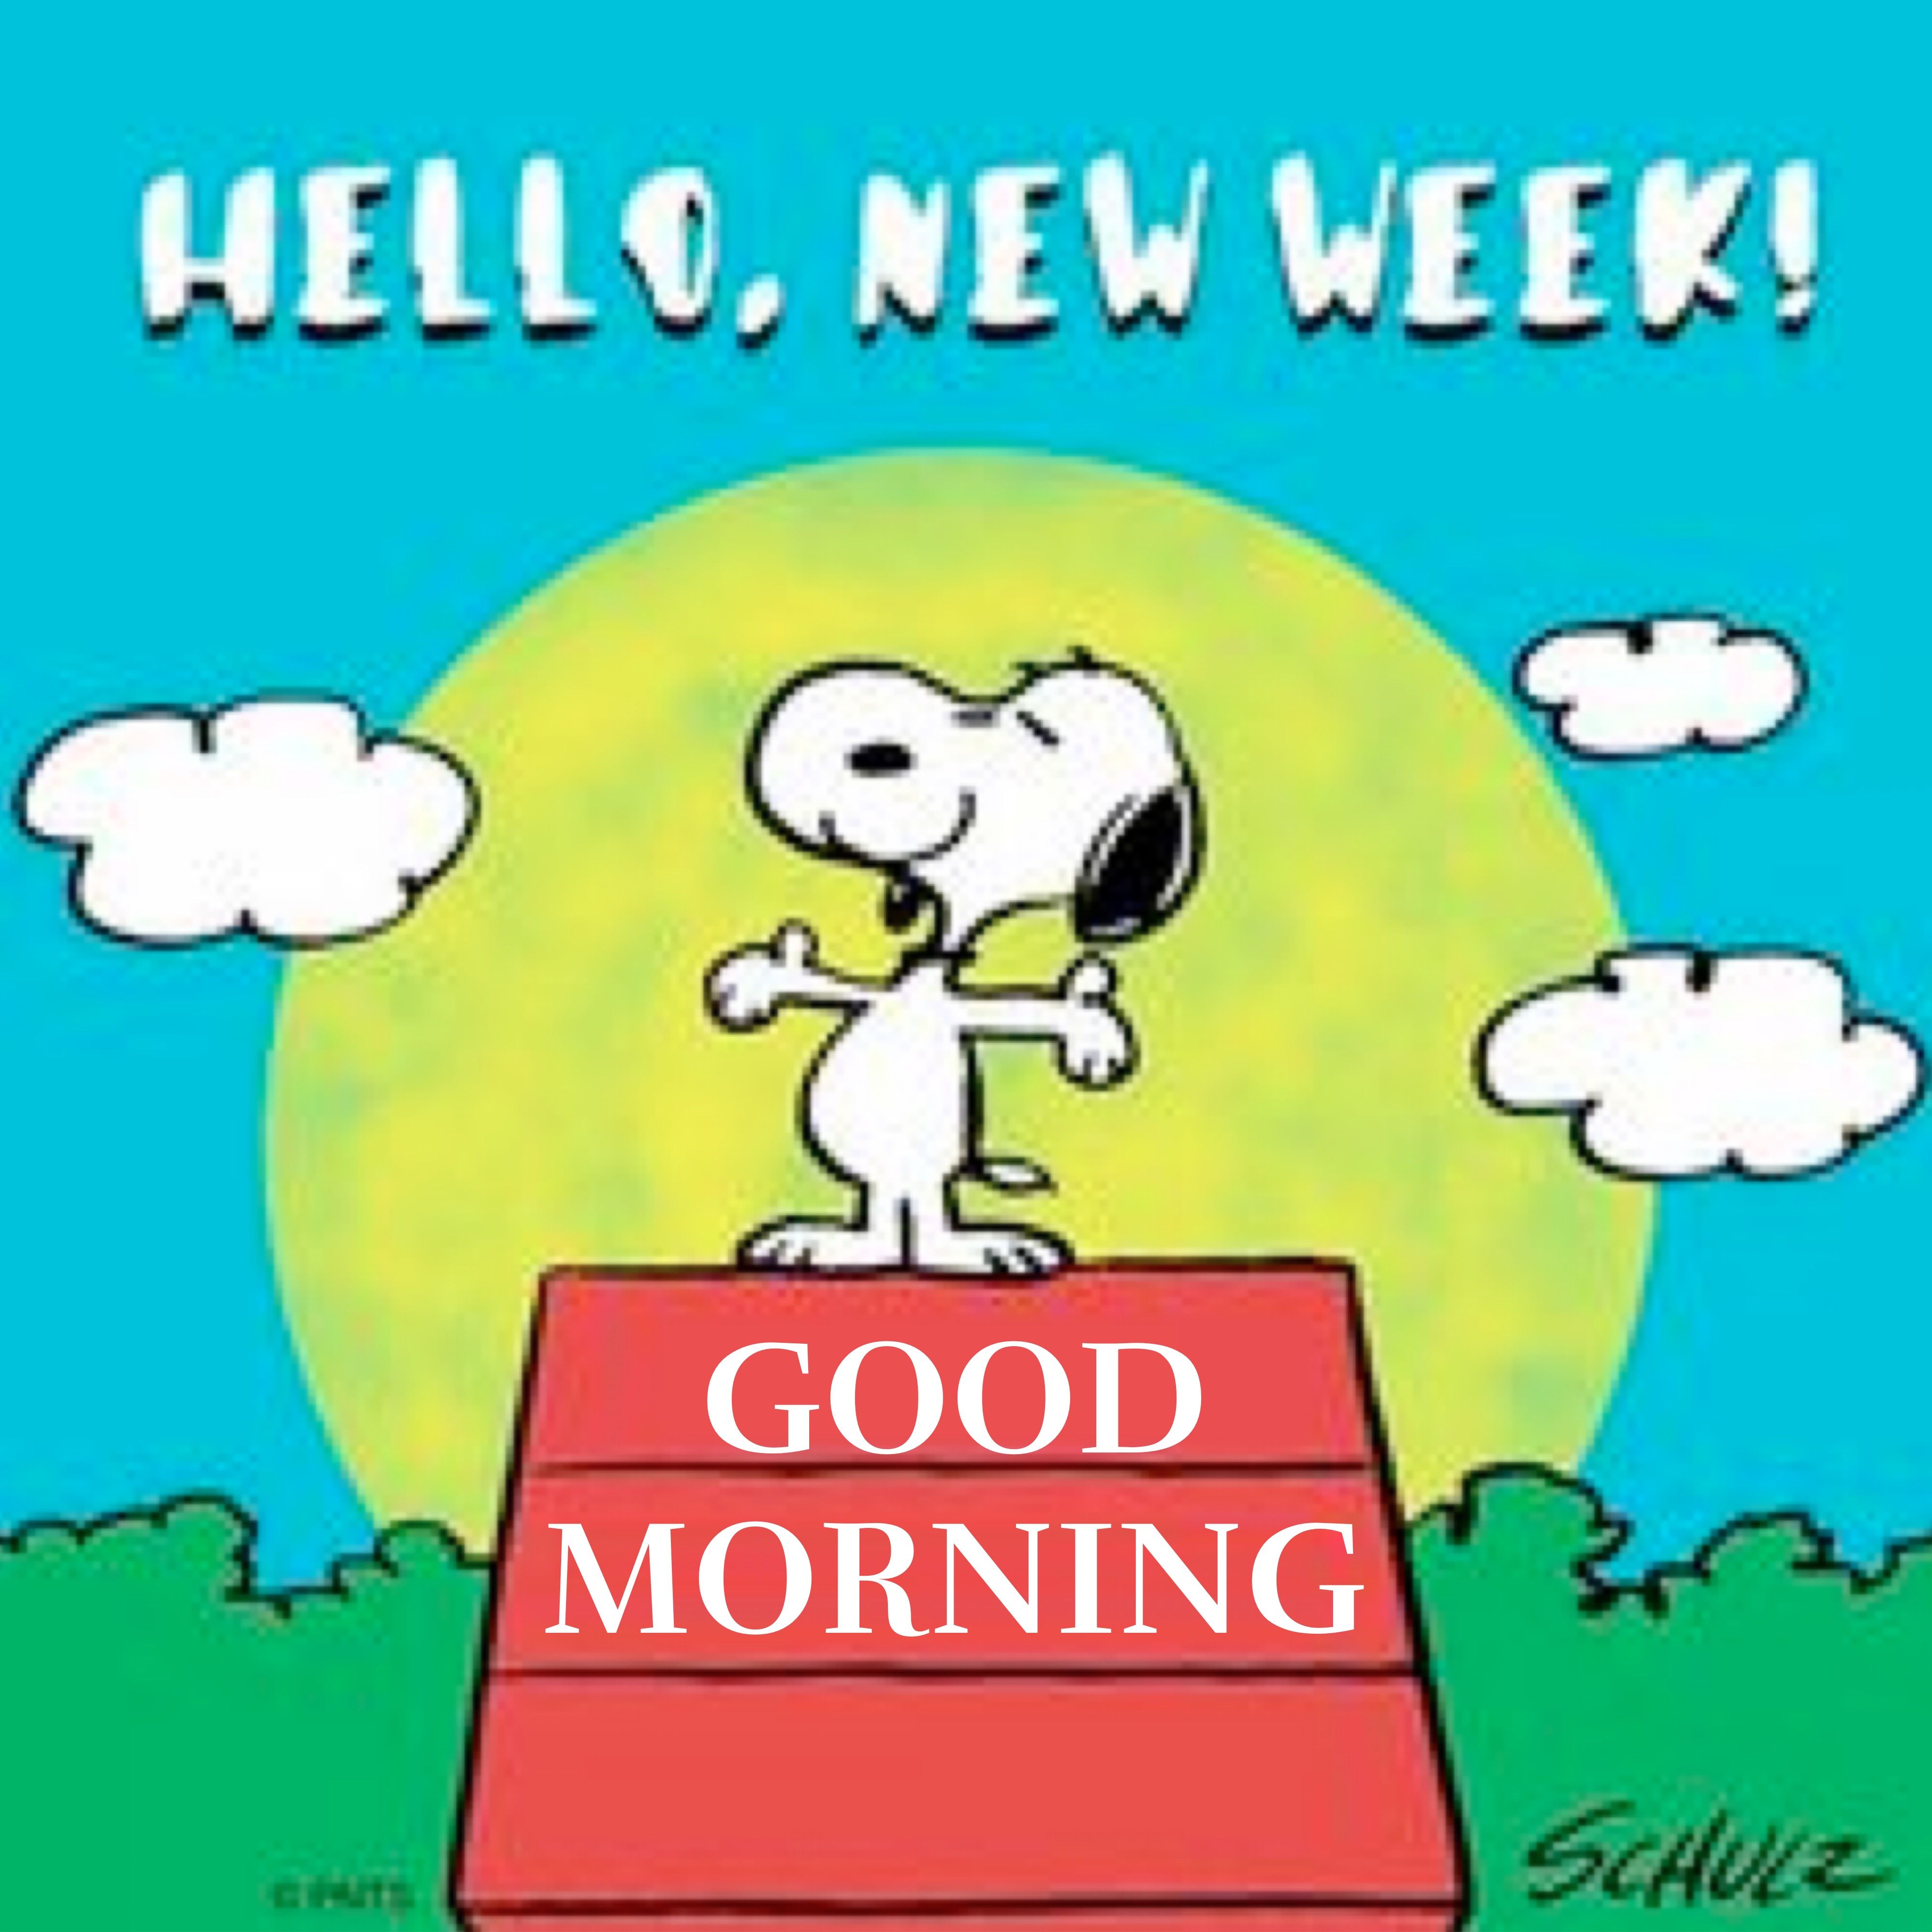 Snoopy Happy Monday Images